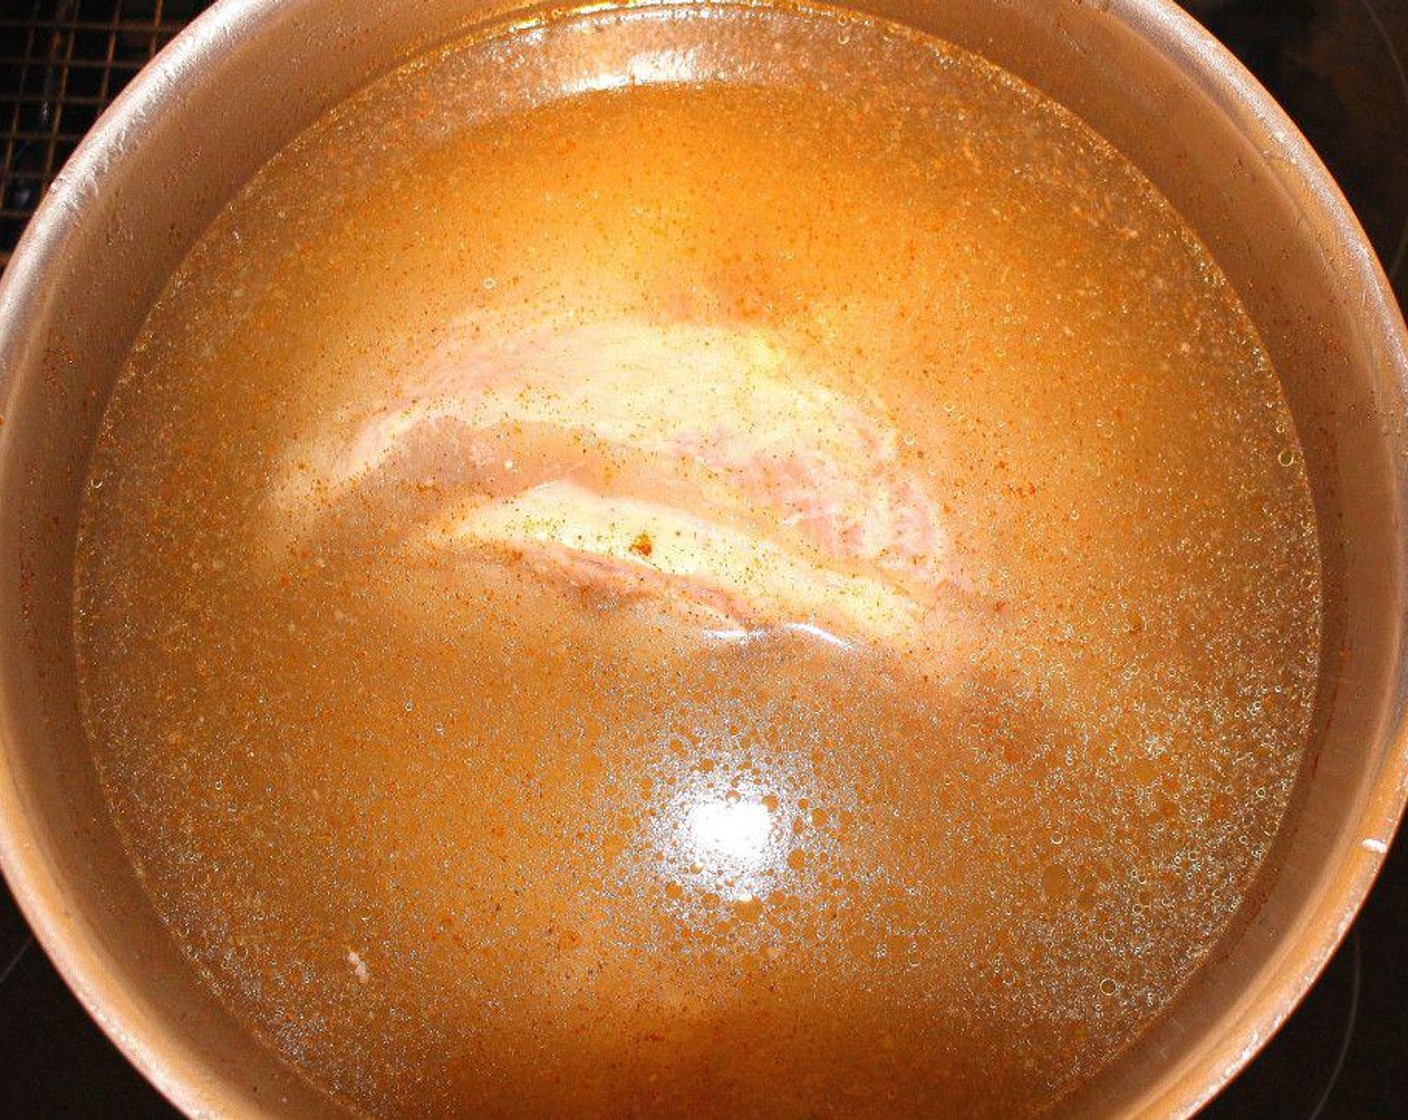 step 2 Make the brine: In a large pot, bring the Water (5 fl oz), Salt (3 Tbsp), Granulated Sugar (1/2 tsp) and Cayenne Pepper (1 pinch) to a boil. Add the Ice (3 cups) to cool the brine down quickly before you add the veal. Brine in the refrigerator overnight.